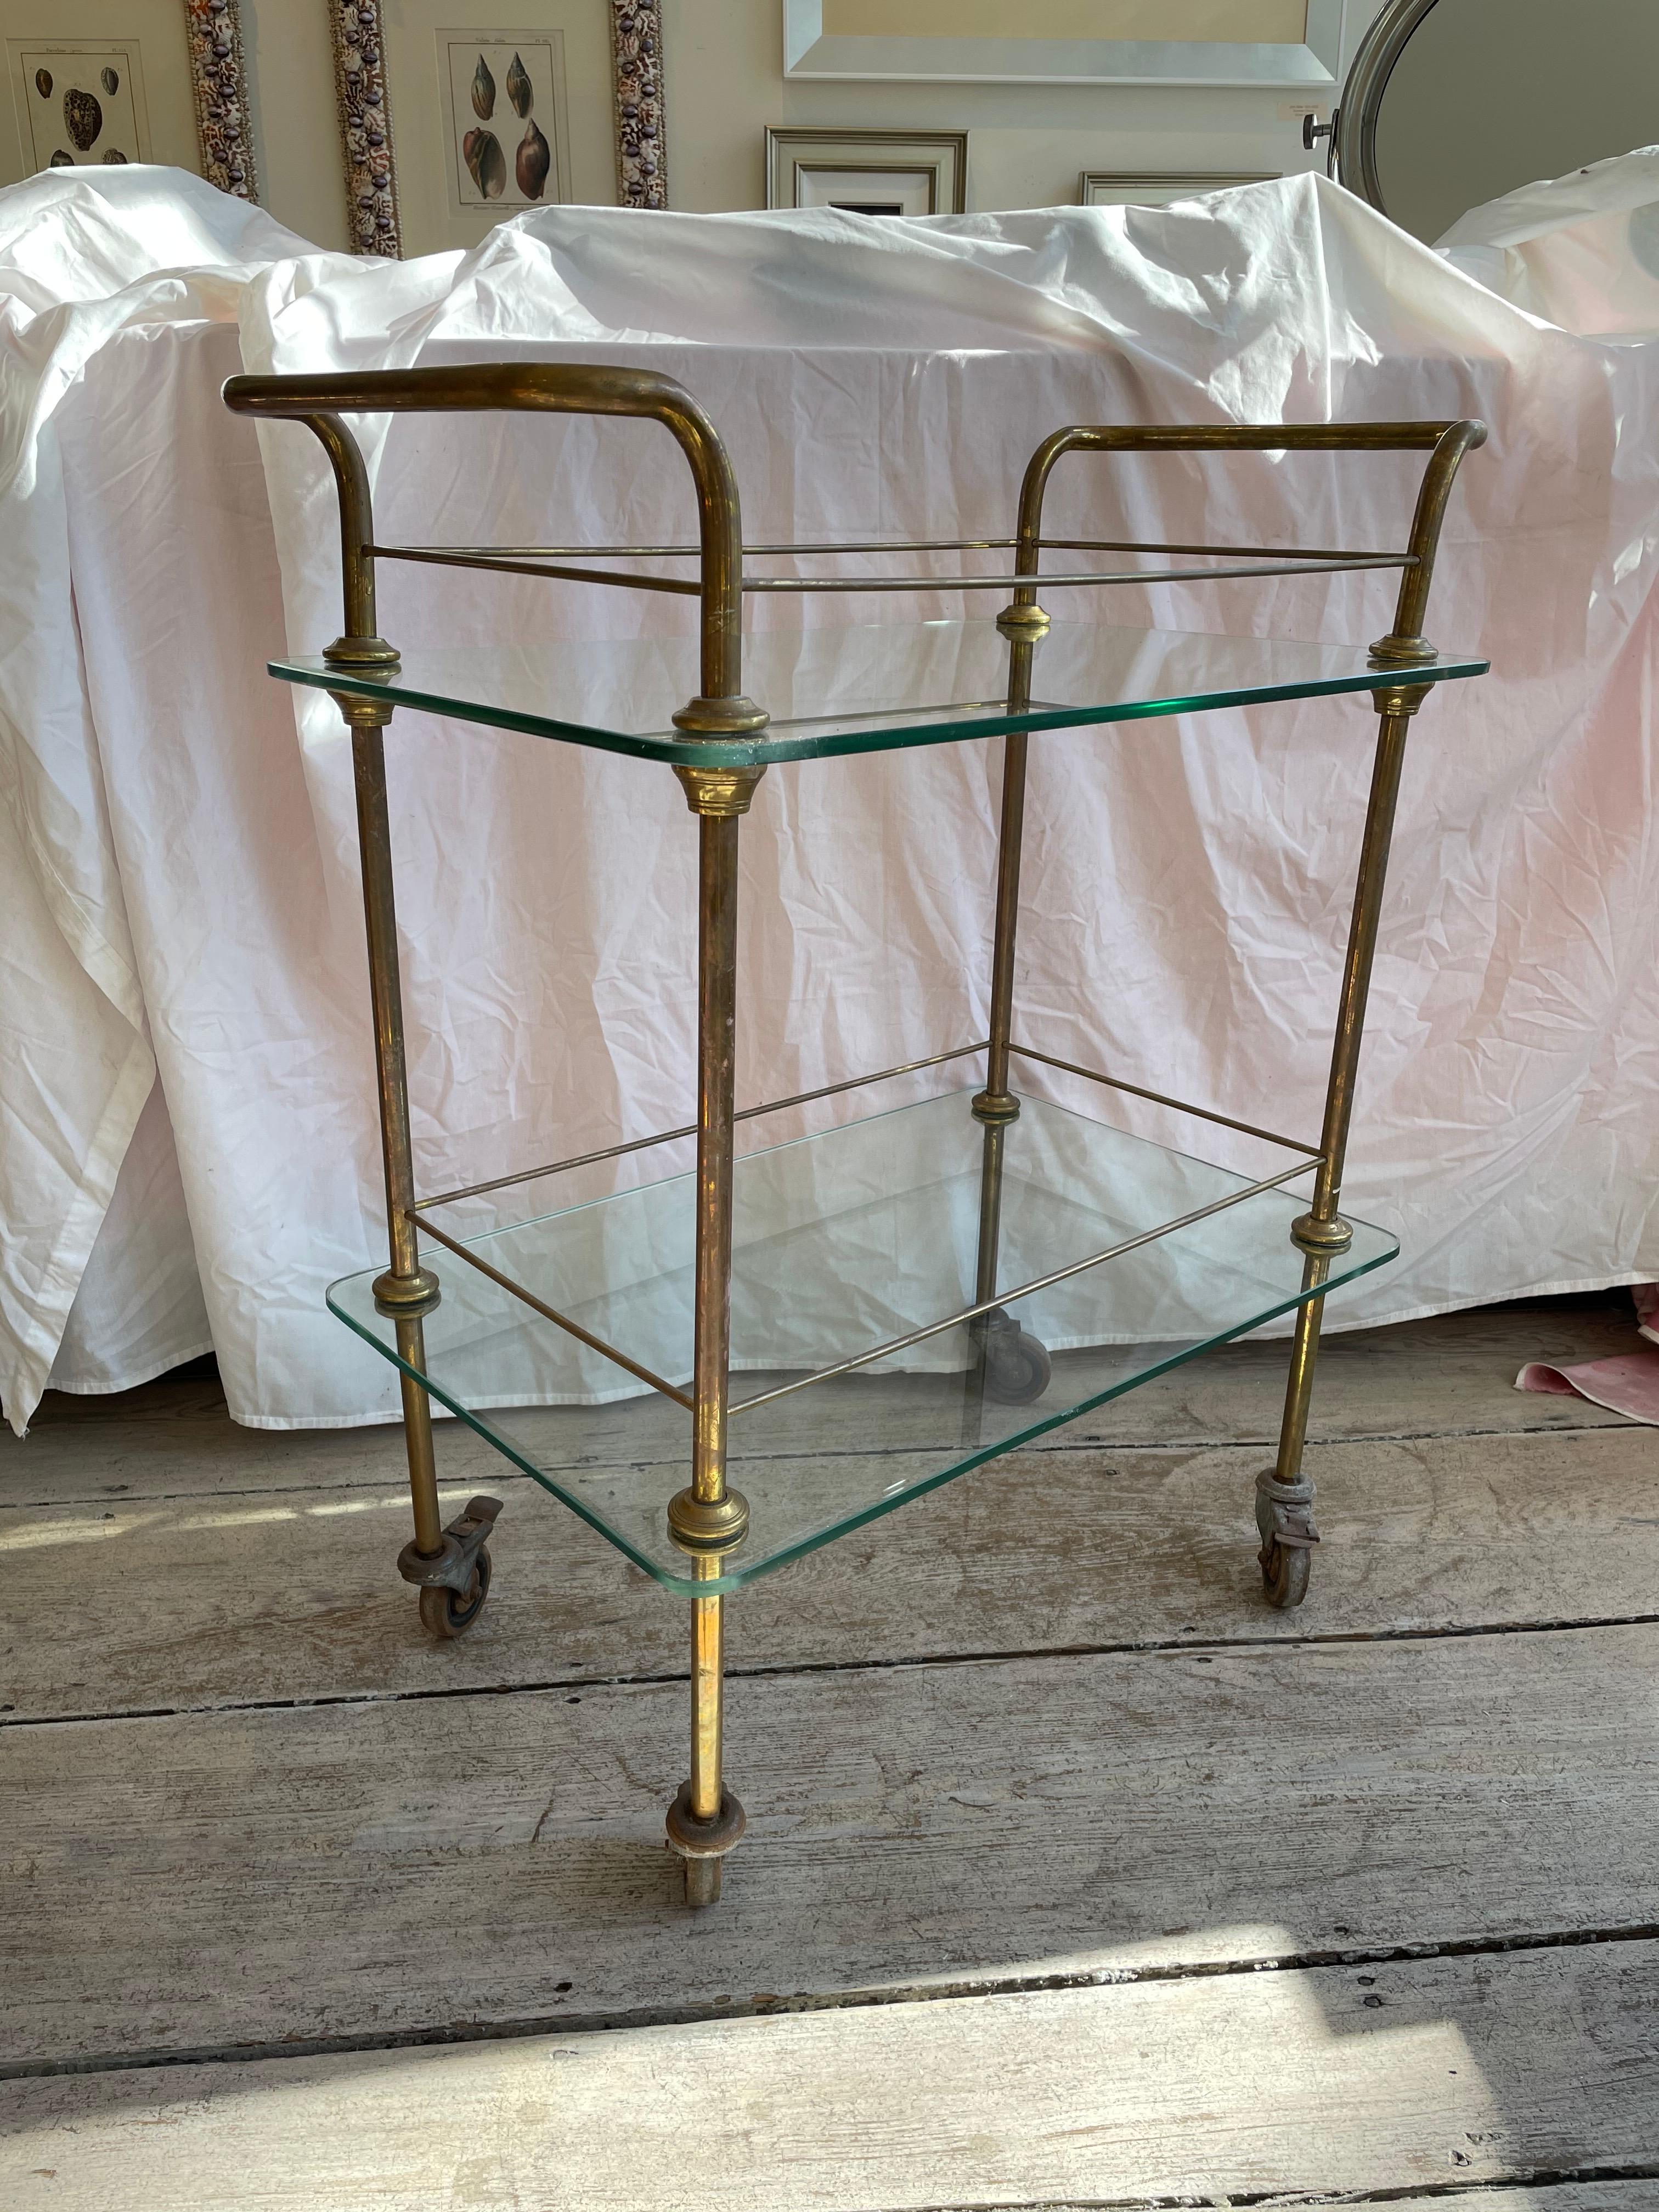 A Mid-Century Modern brass bar cart. Double sided handles with brass rail around both top and bottom glass shelves. Original wheels complete with brakes. C, 1960's. Glass replaced. Rolls smoothly and easily.